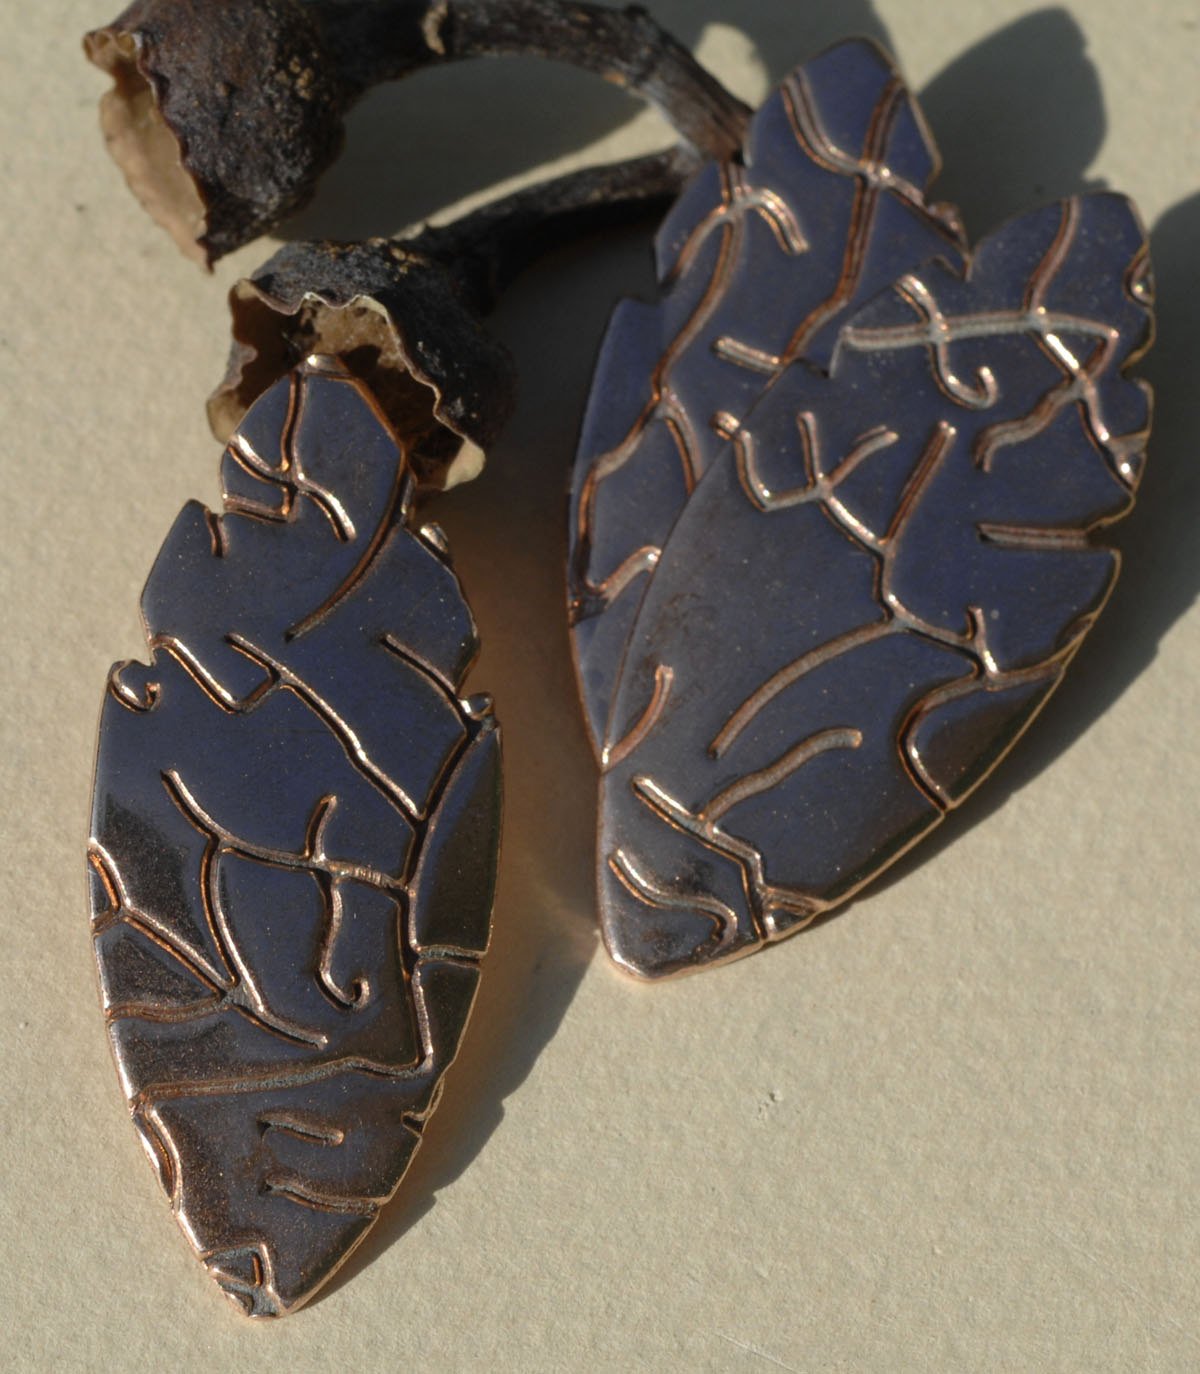 Large Leaf Blank 47mm x 20mm Cutout Shape - Enameling Stamping Texturing Blanks - Variety of Metal